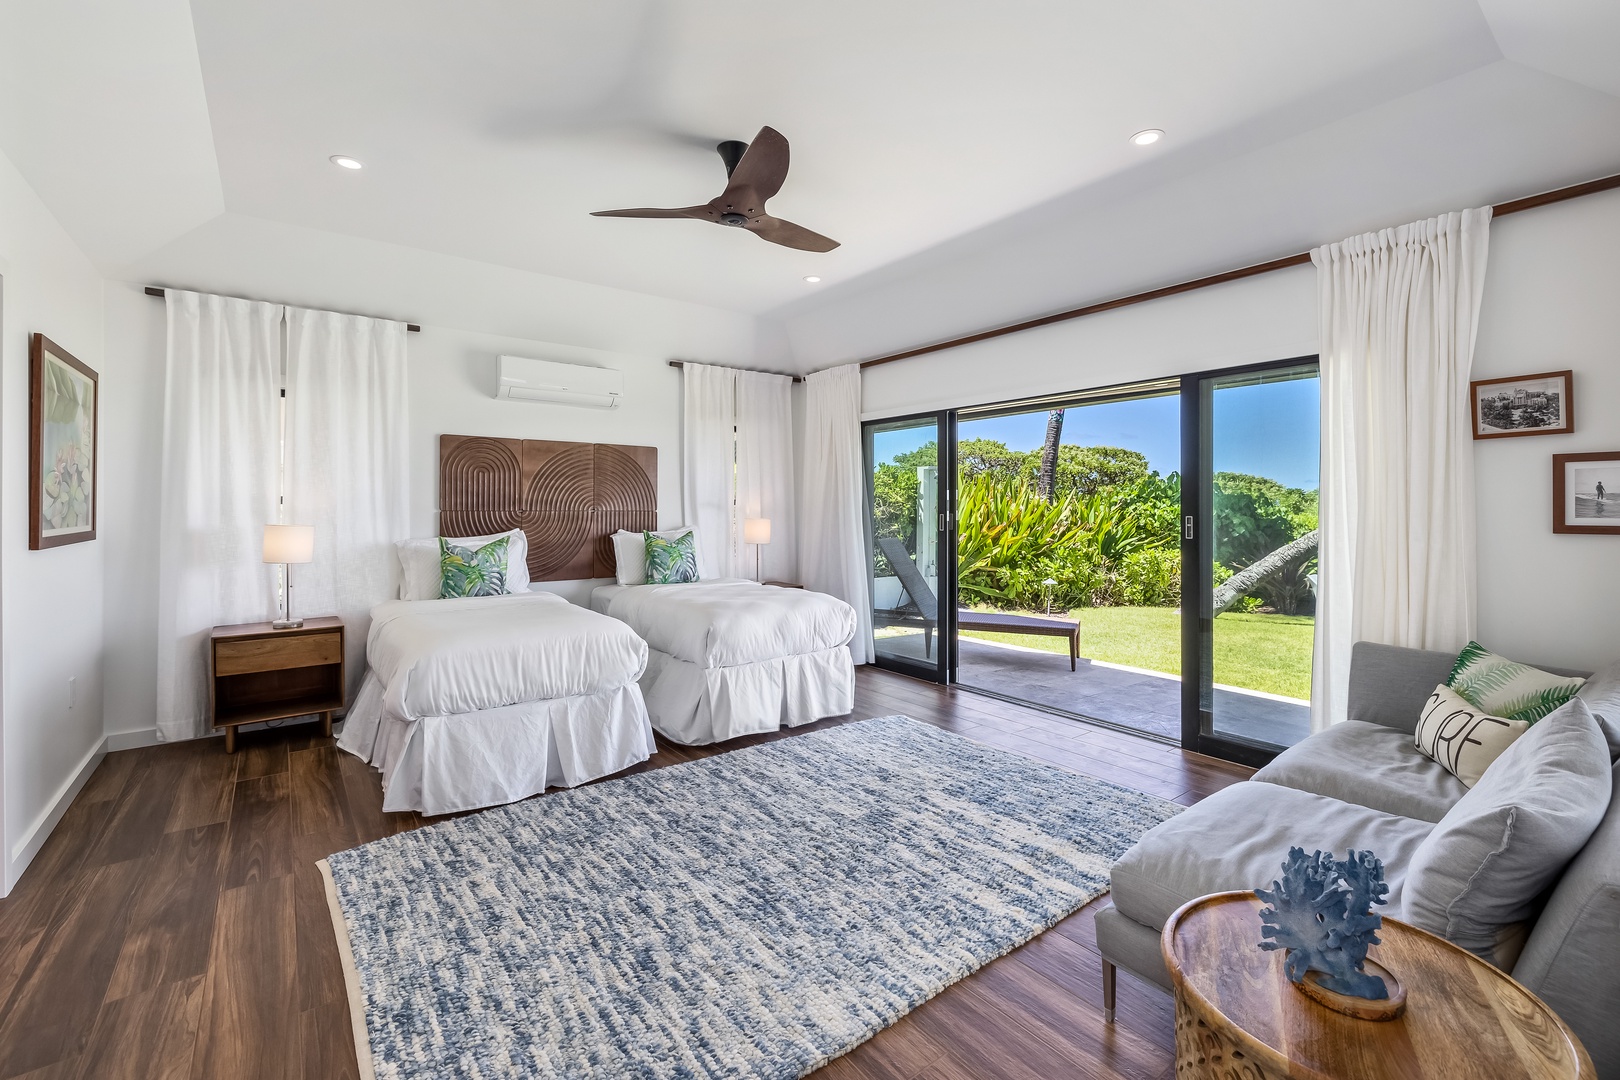 Kailua Vacation Rentals, Kailua Beach Villa - Second suite - Makai North: Choose between 2 twins or a king, complemented by a ceiling fan and split AC.